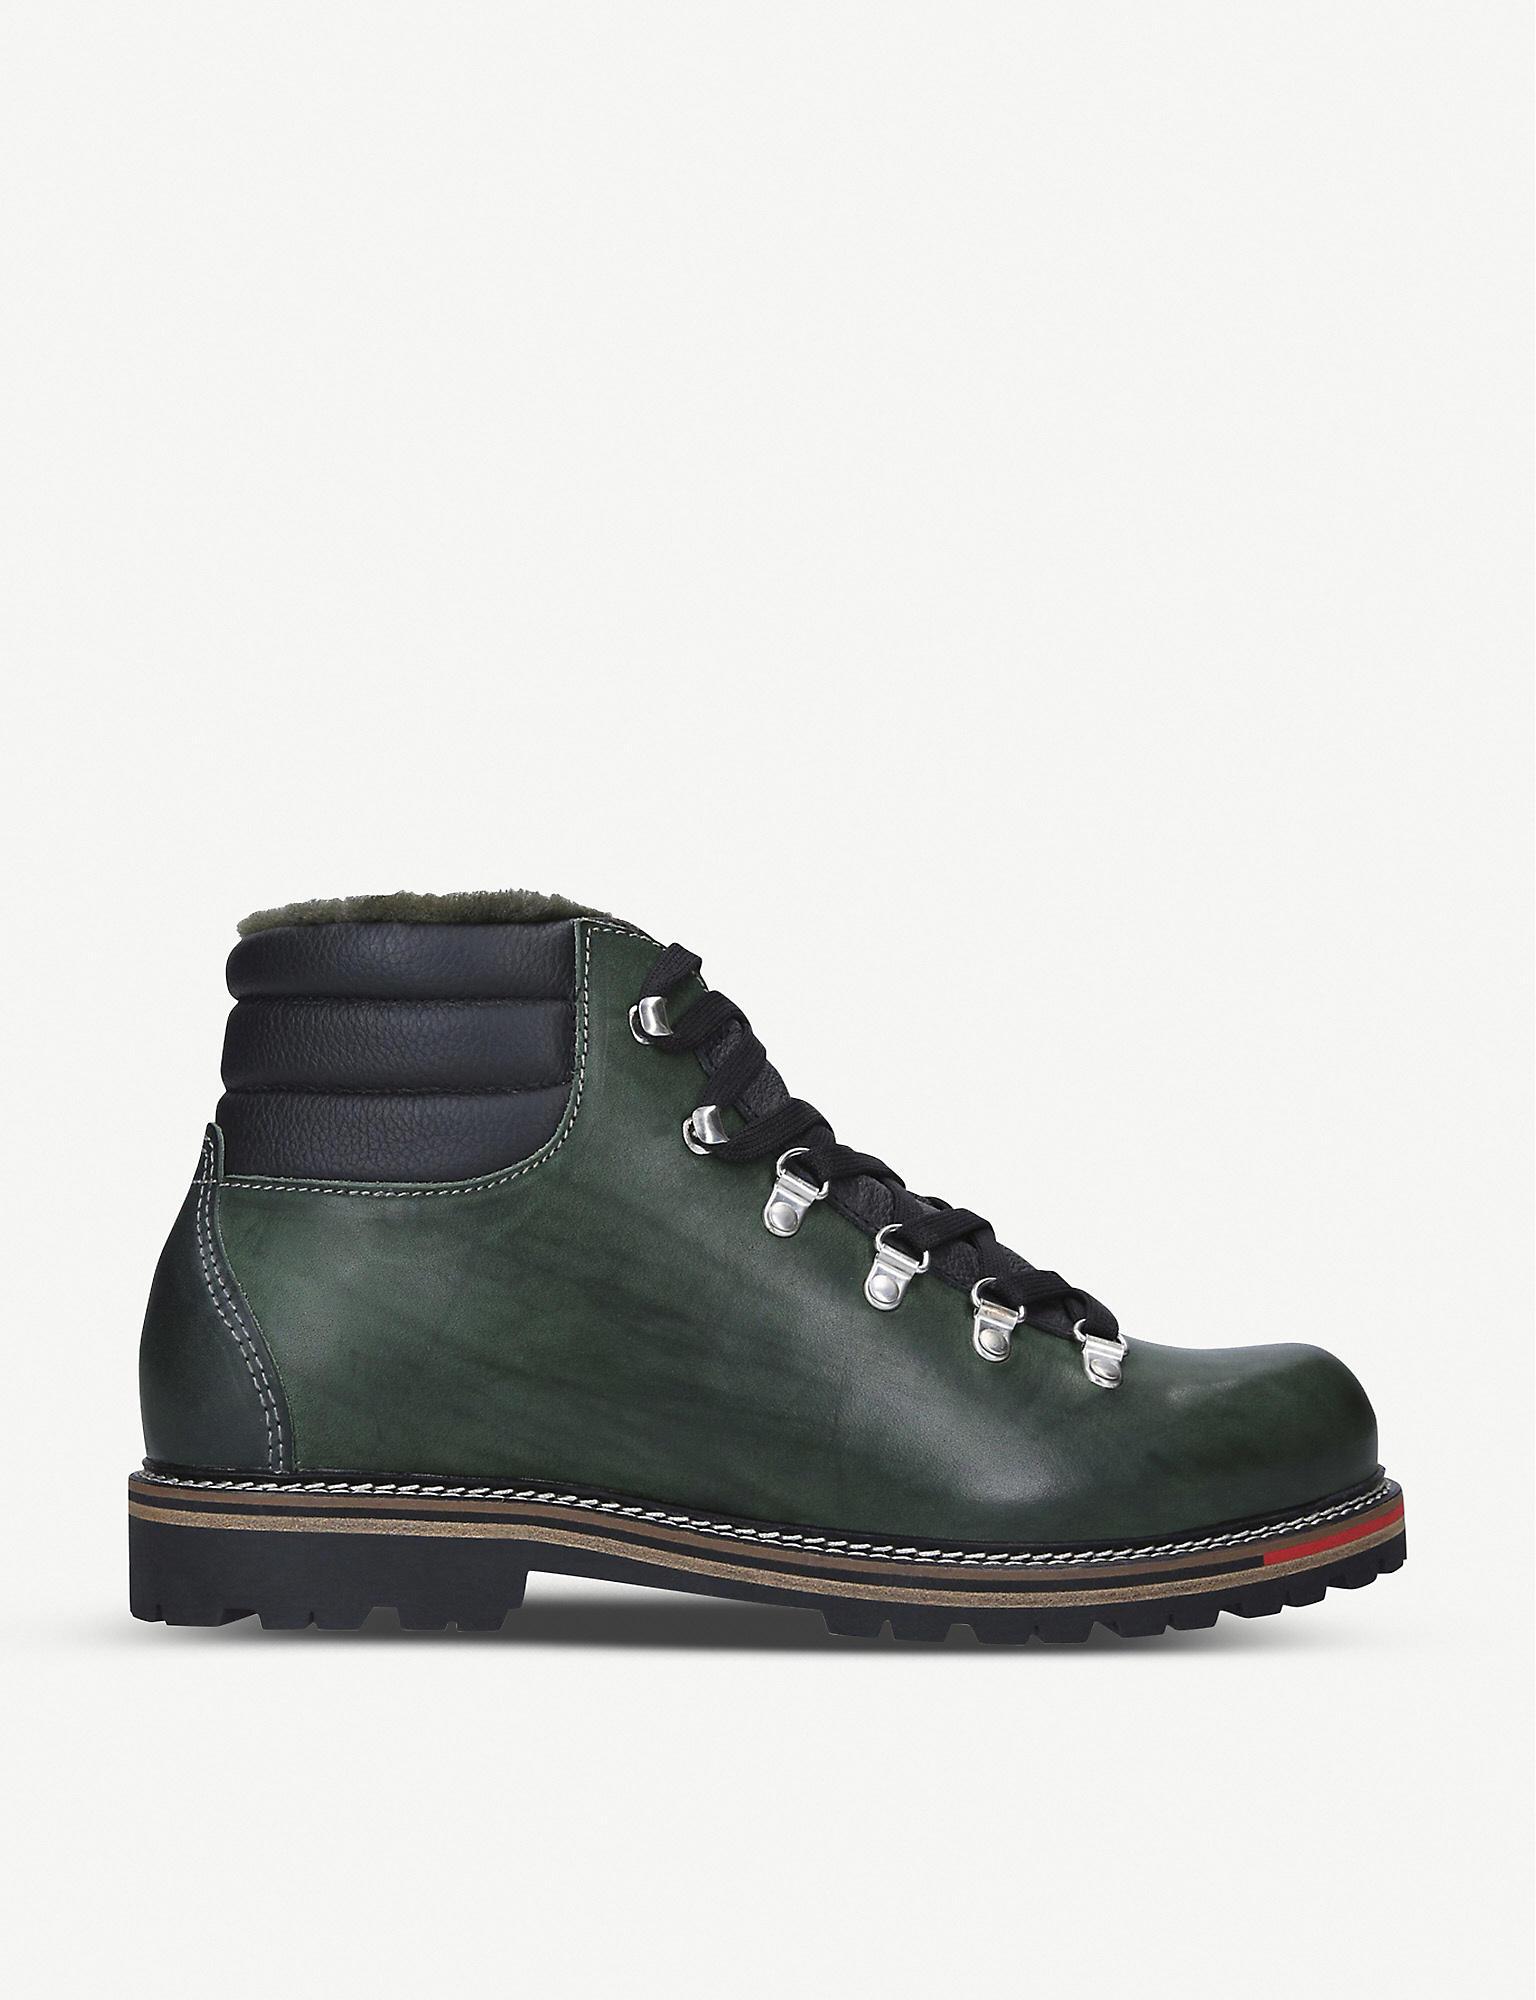 MONTELLIANA 1965 Alberto Leather And Shearling Hiking Boots in Dark Green  (Green) for Men | Lyst